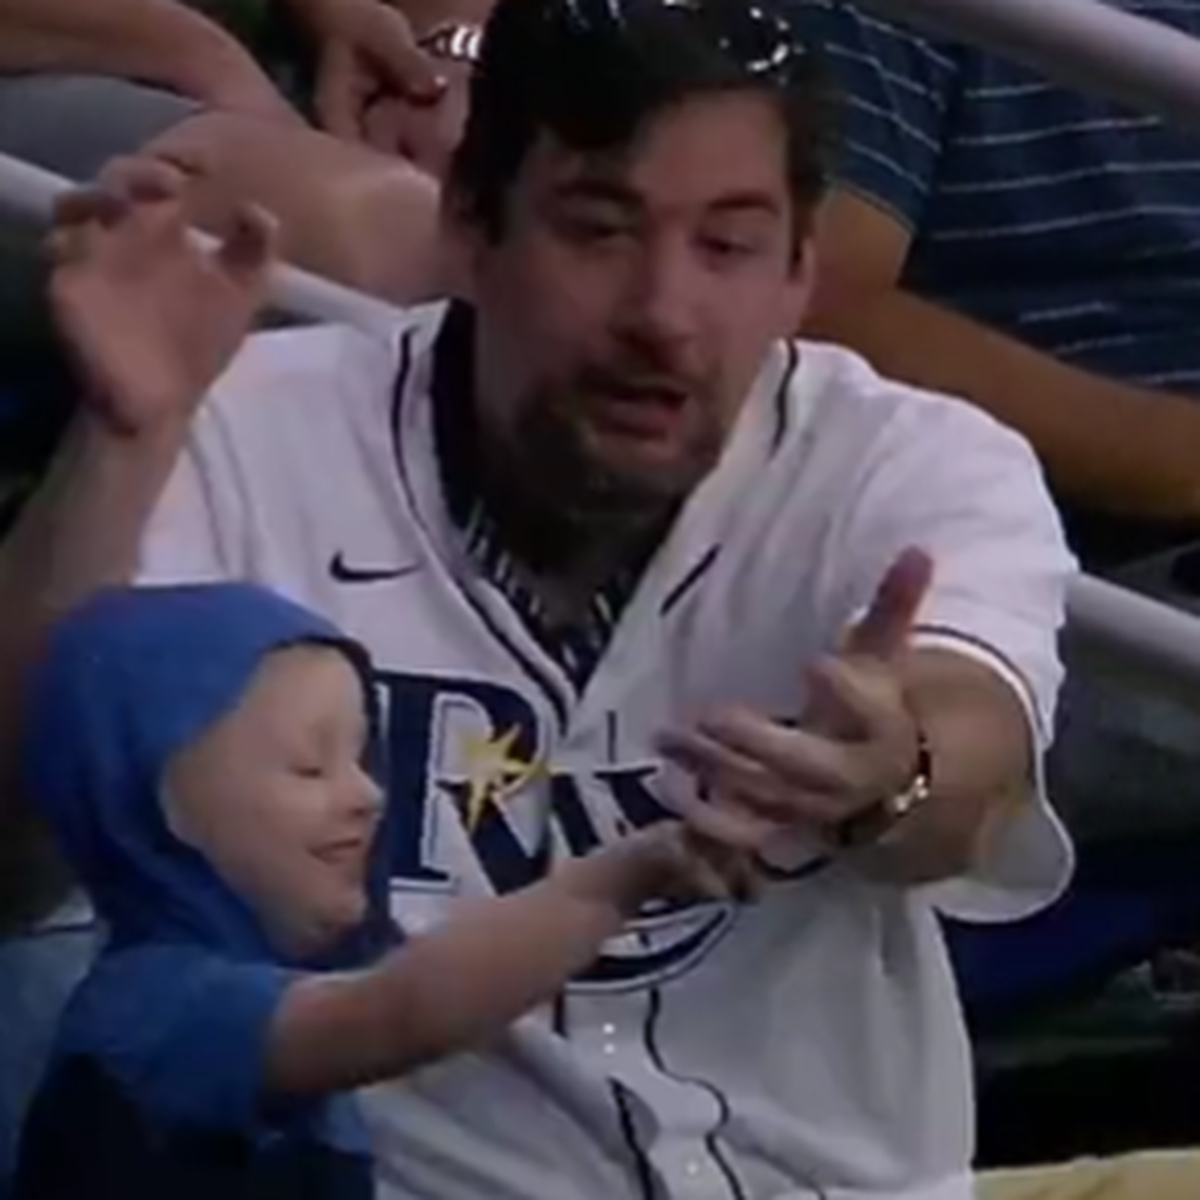 Dad's Quick Thinking Saves Little Boy's Face at Baseball Game - ABC News